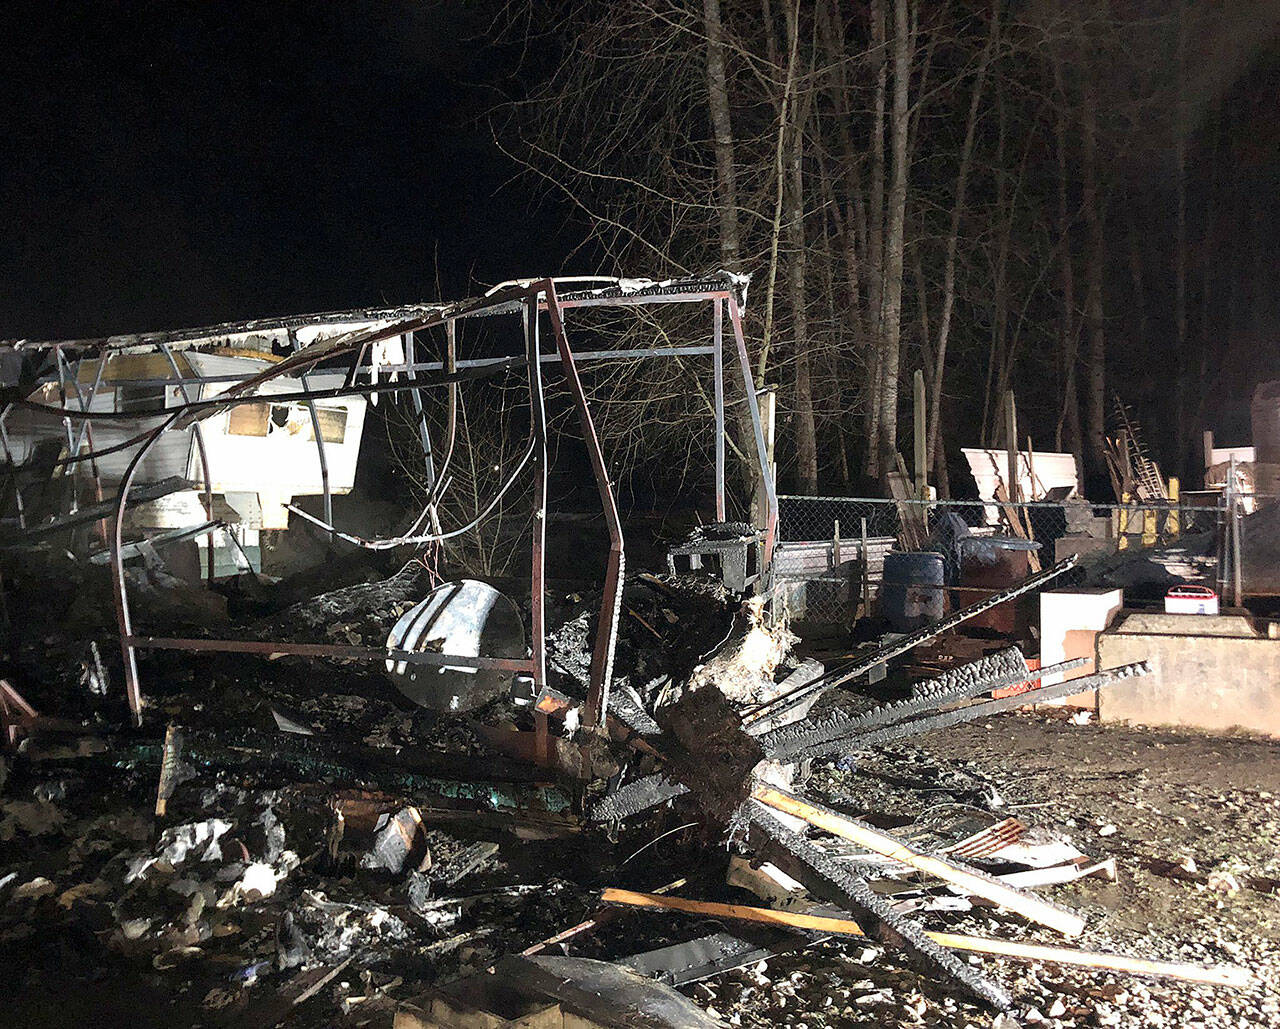 A man was injured and a woman found dead Sunday night after an RV fire in Marysville. (Marysville Fire District)